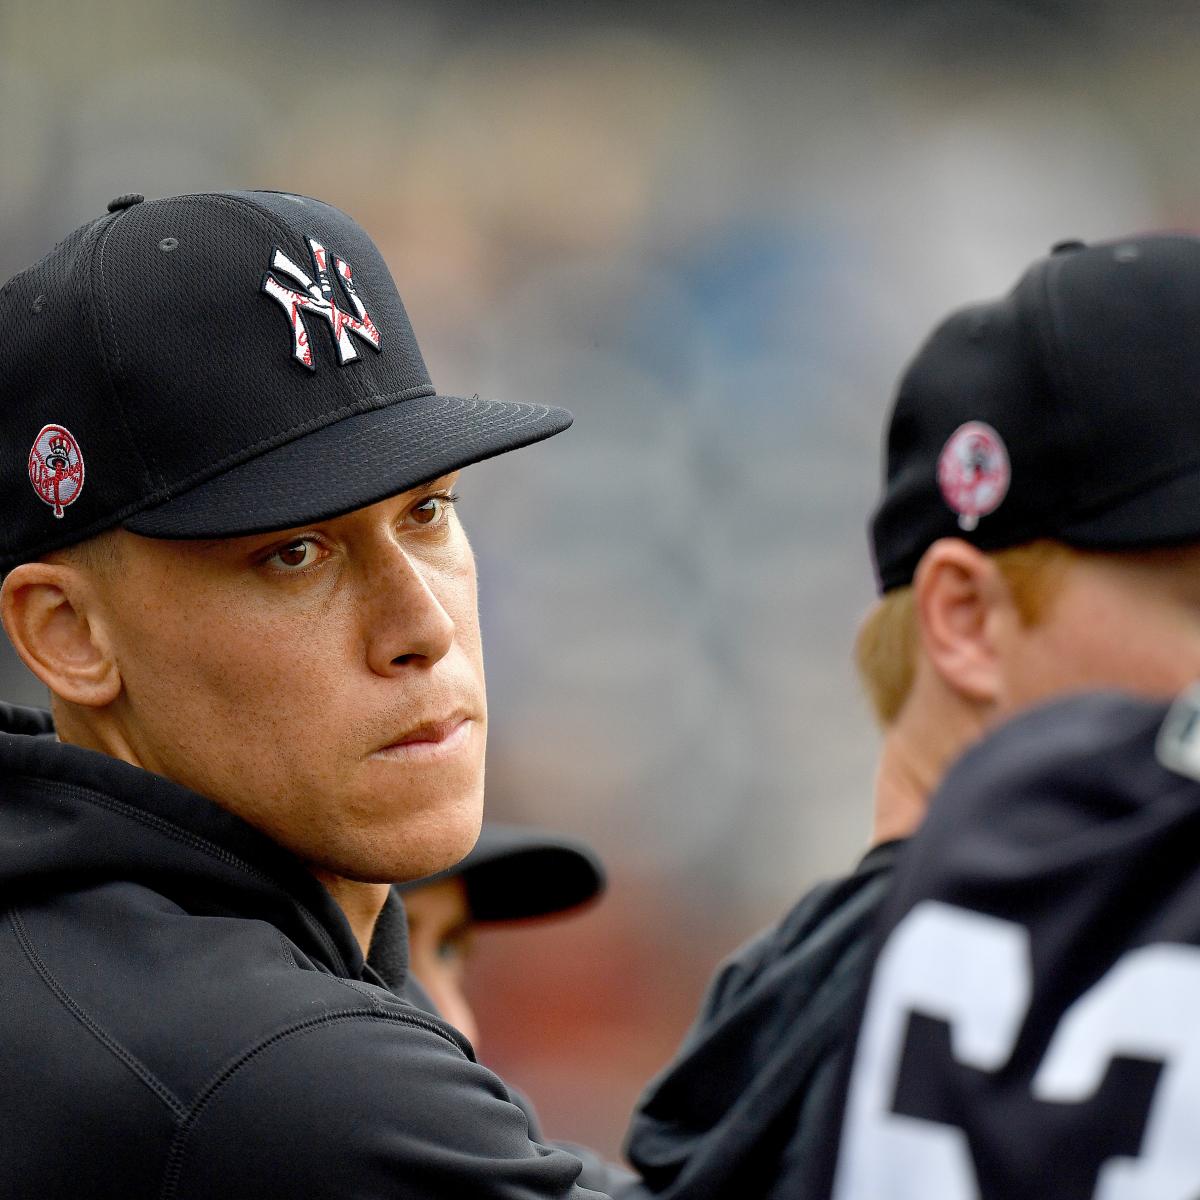 Yankees' Aaron Judge out at Least 2 Weeks with Rib Injury; Surgery